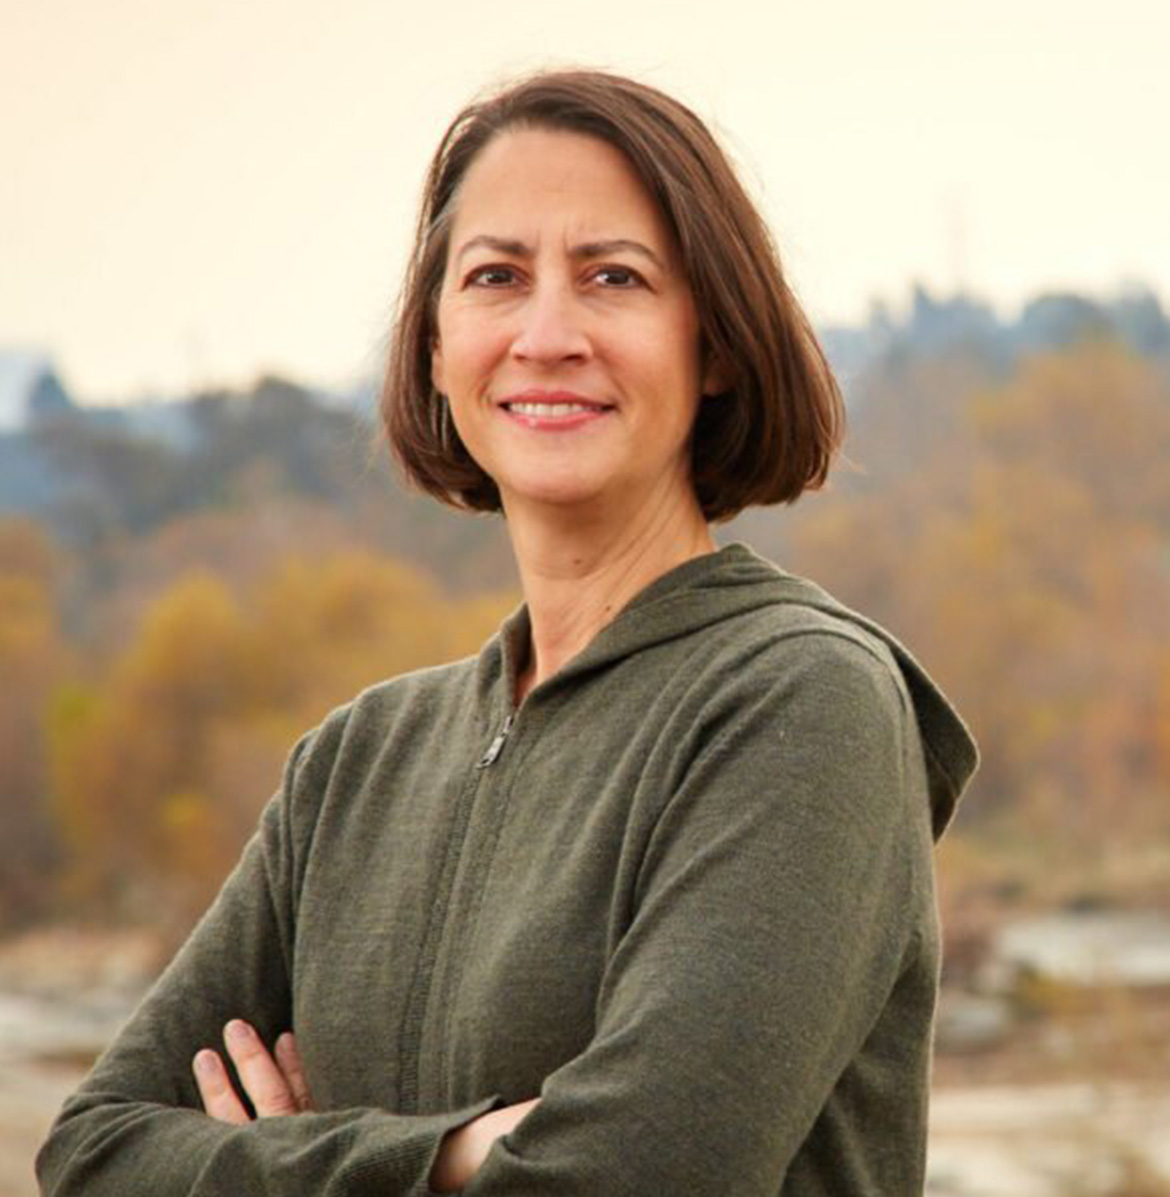 Laura Friedman for Congress, 30th Congressional District California